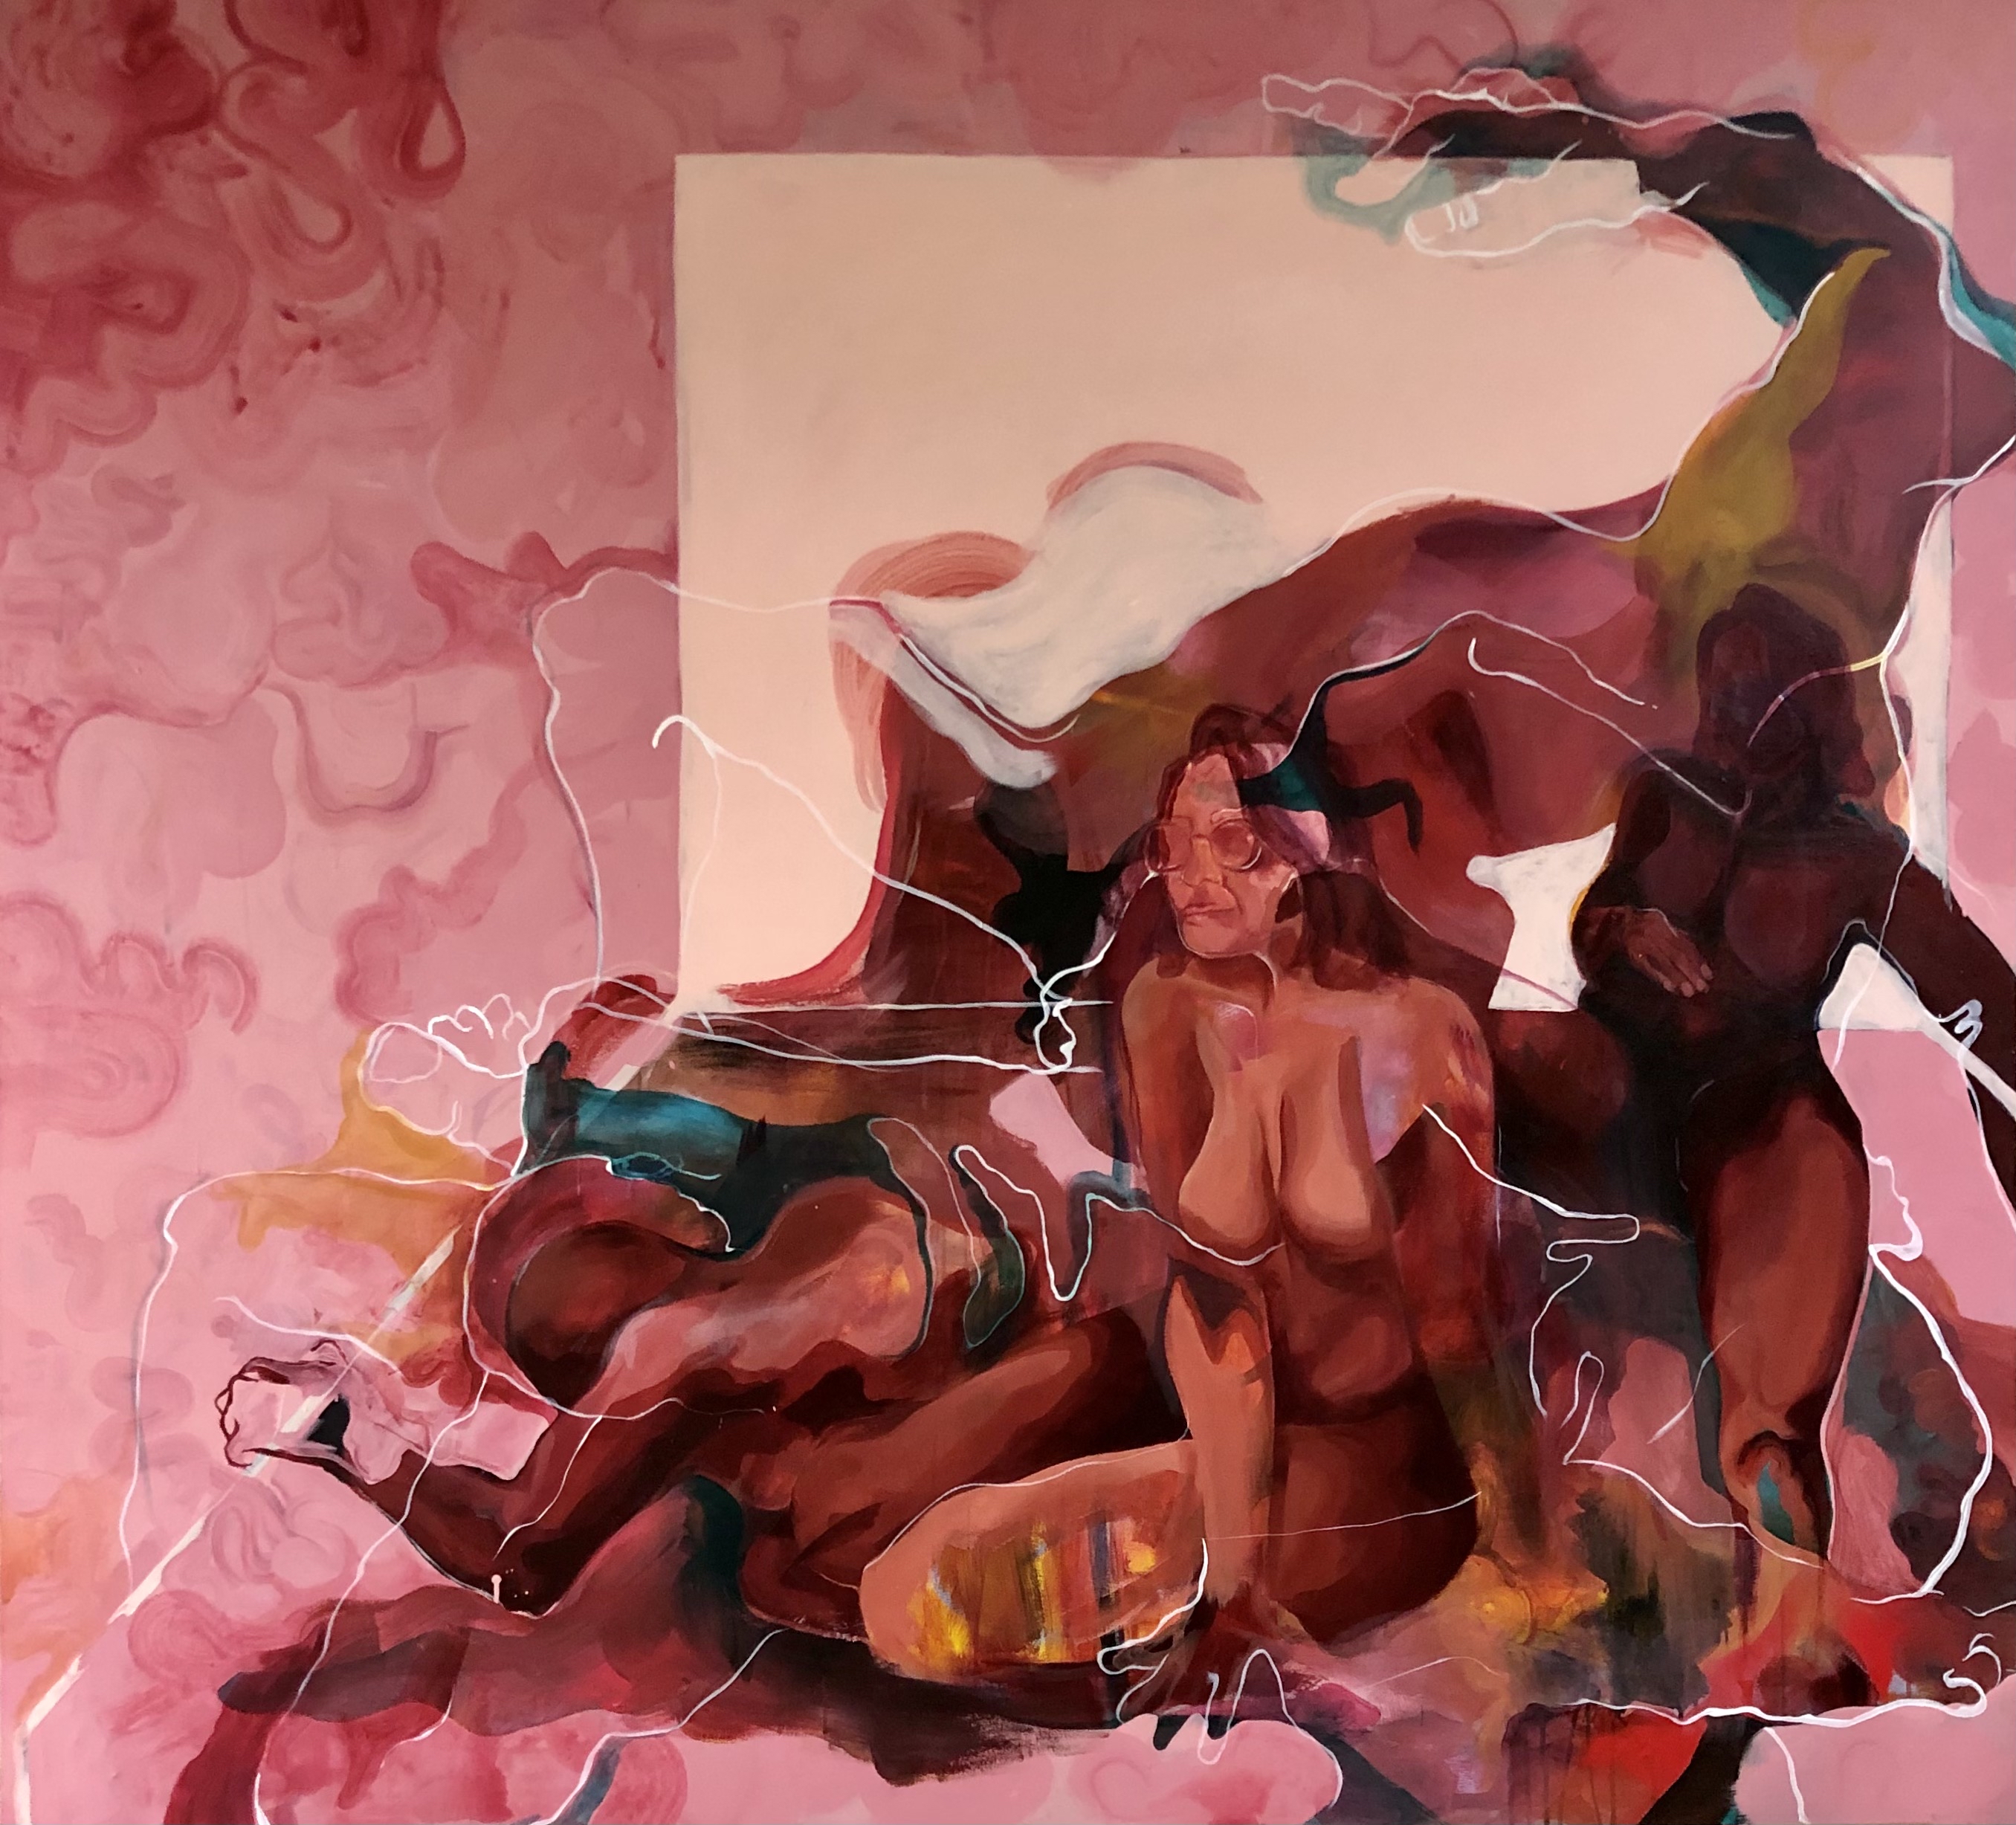 Pink space with a pile up of nude bodies, some more rendered or more discernible than others, in various positions. Soft white outlines of body parts are layered on top of the bodies. 